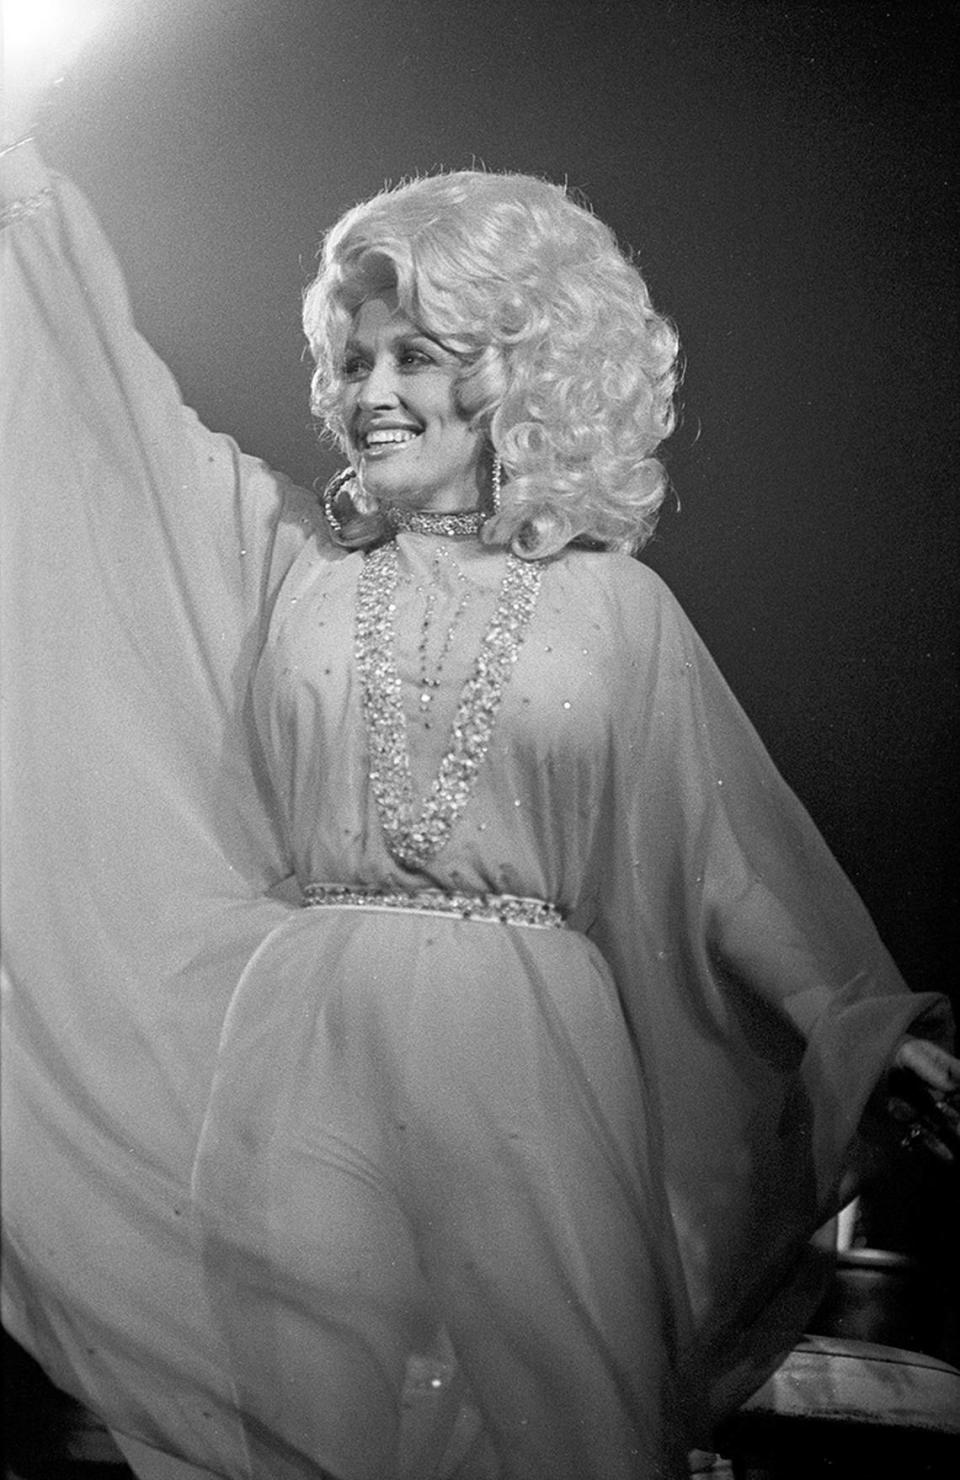 Dec. 2, 1977: Dolly Parton performing in concert at Panther Hall in Fort Worth, Texas, to a crowd of 1,250 people in the venue’s country music ballroom.